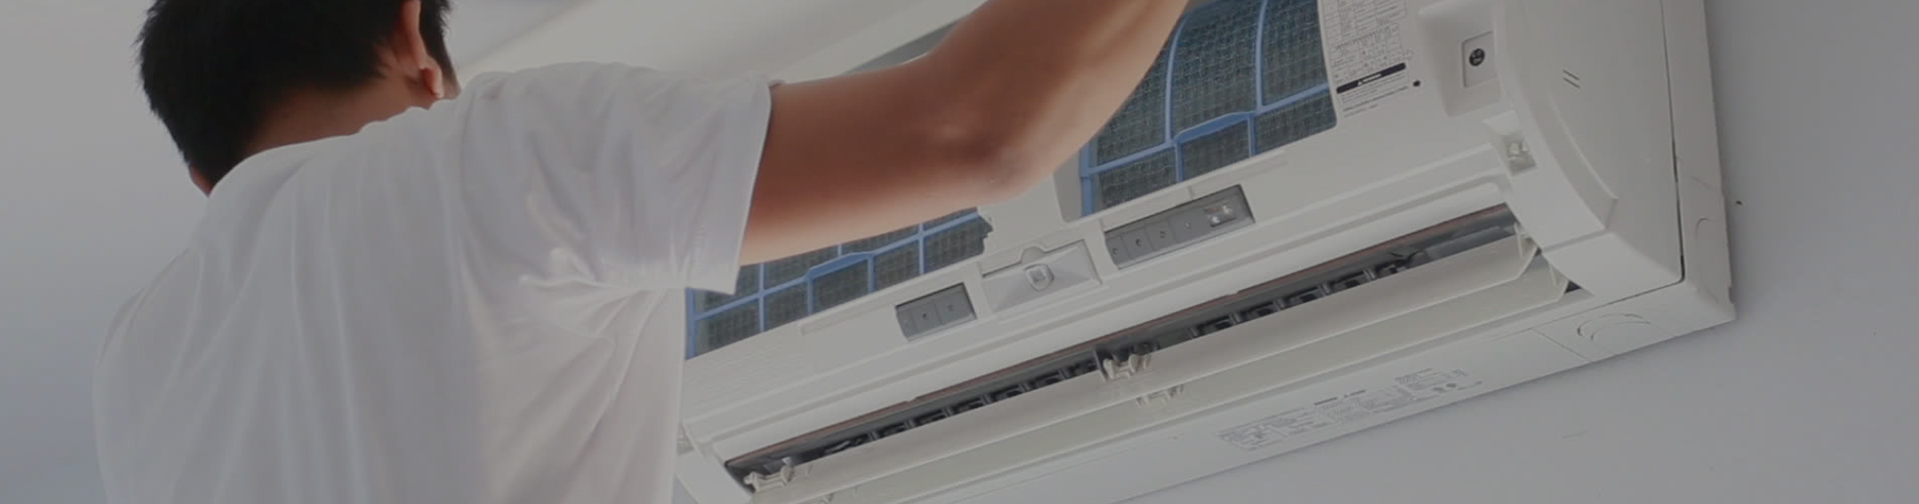 Air Duct Cleaning: be ready for this process